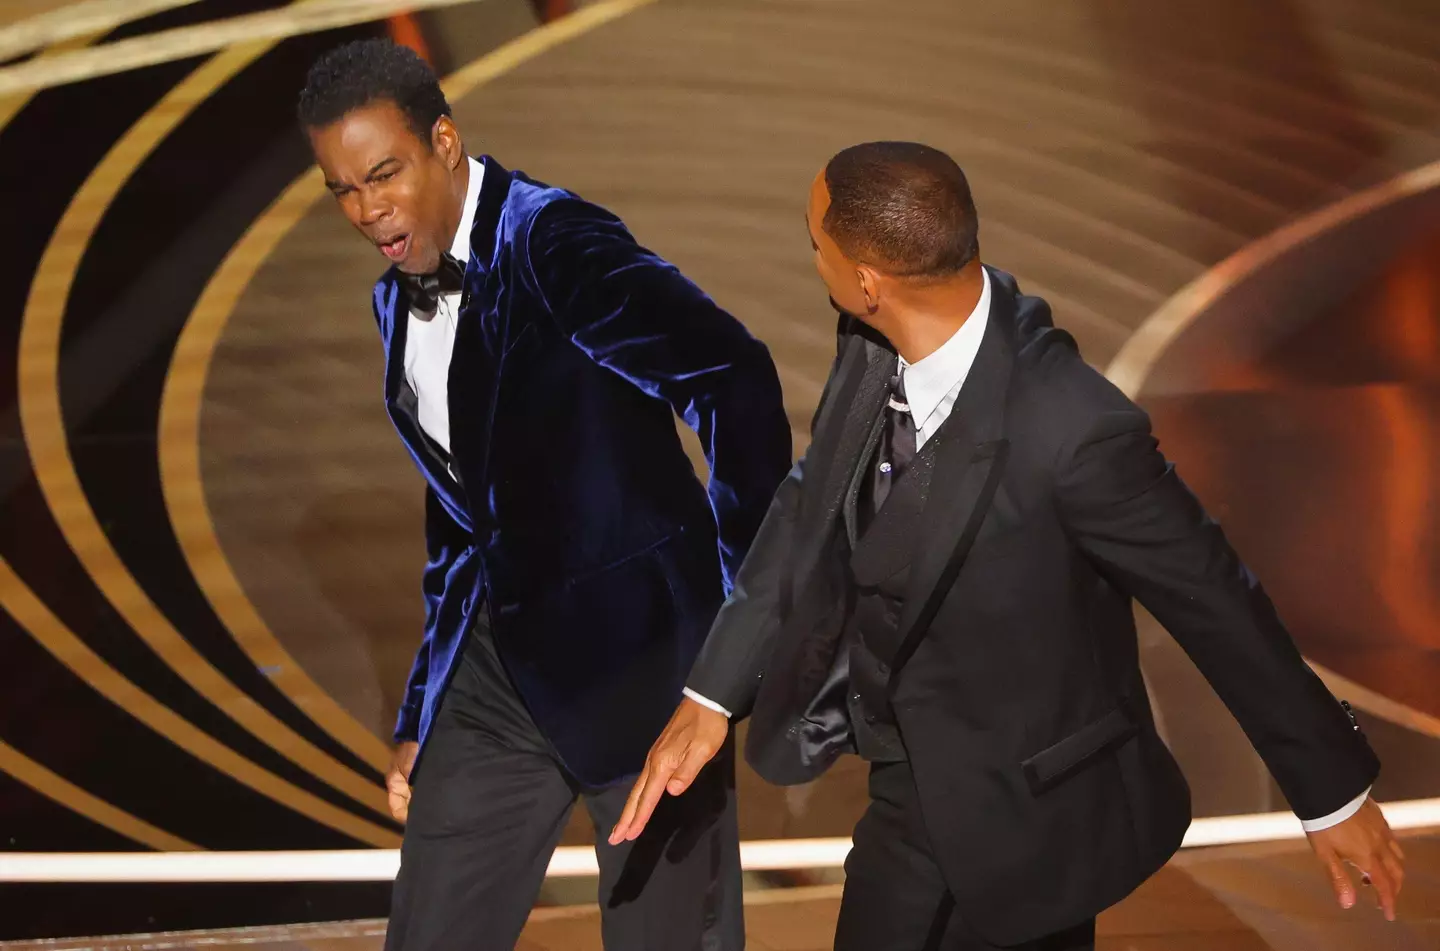 Will Smith slapped Chris Rock at the Oscars.